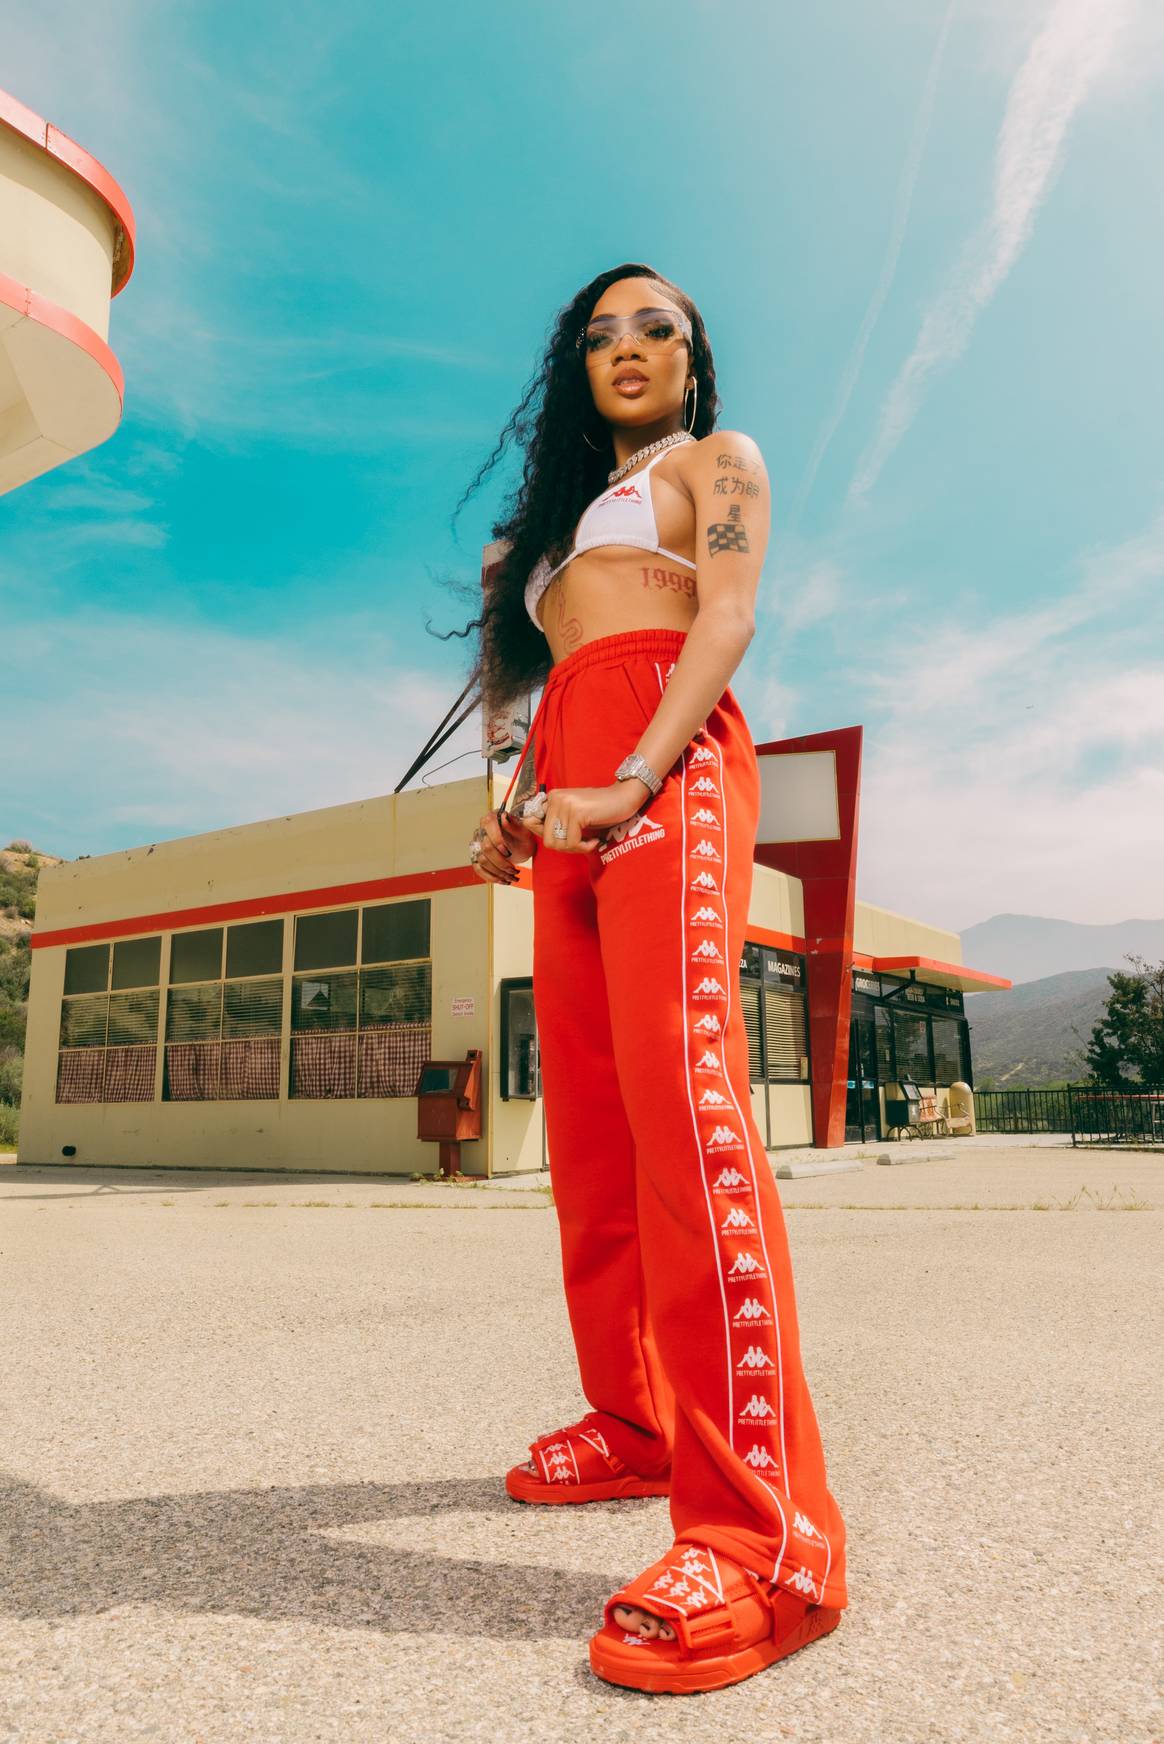 Image: PrettyLittleThing x Kappa collection